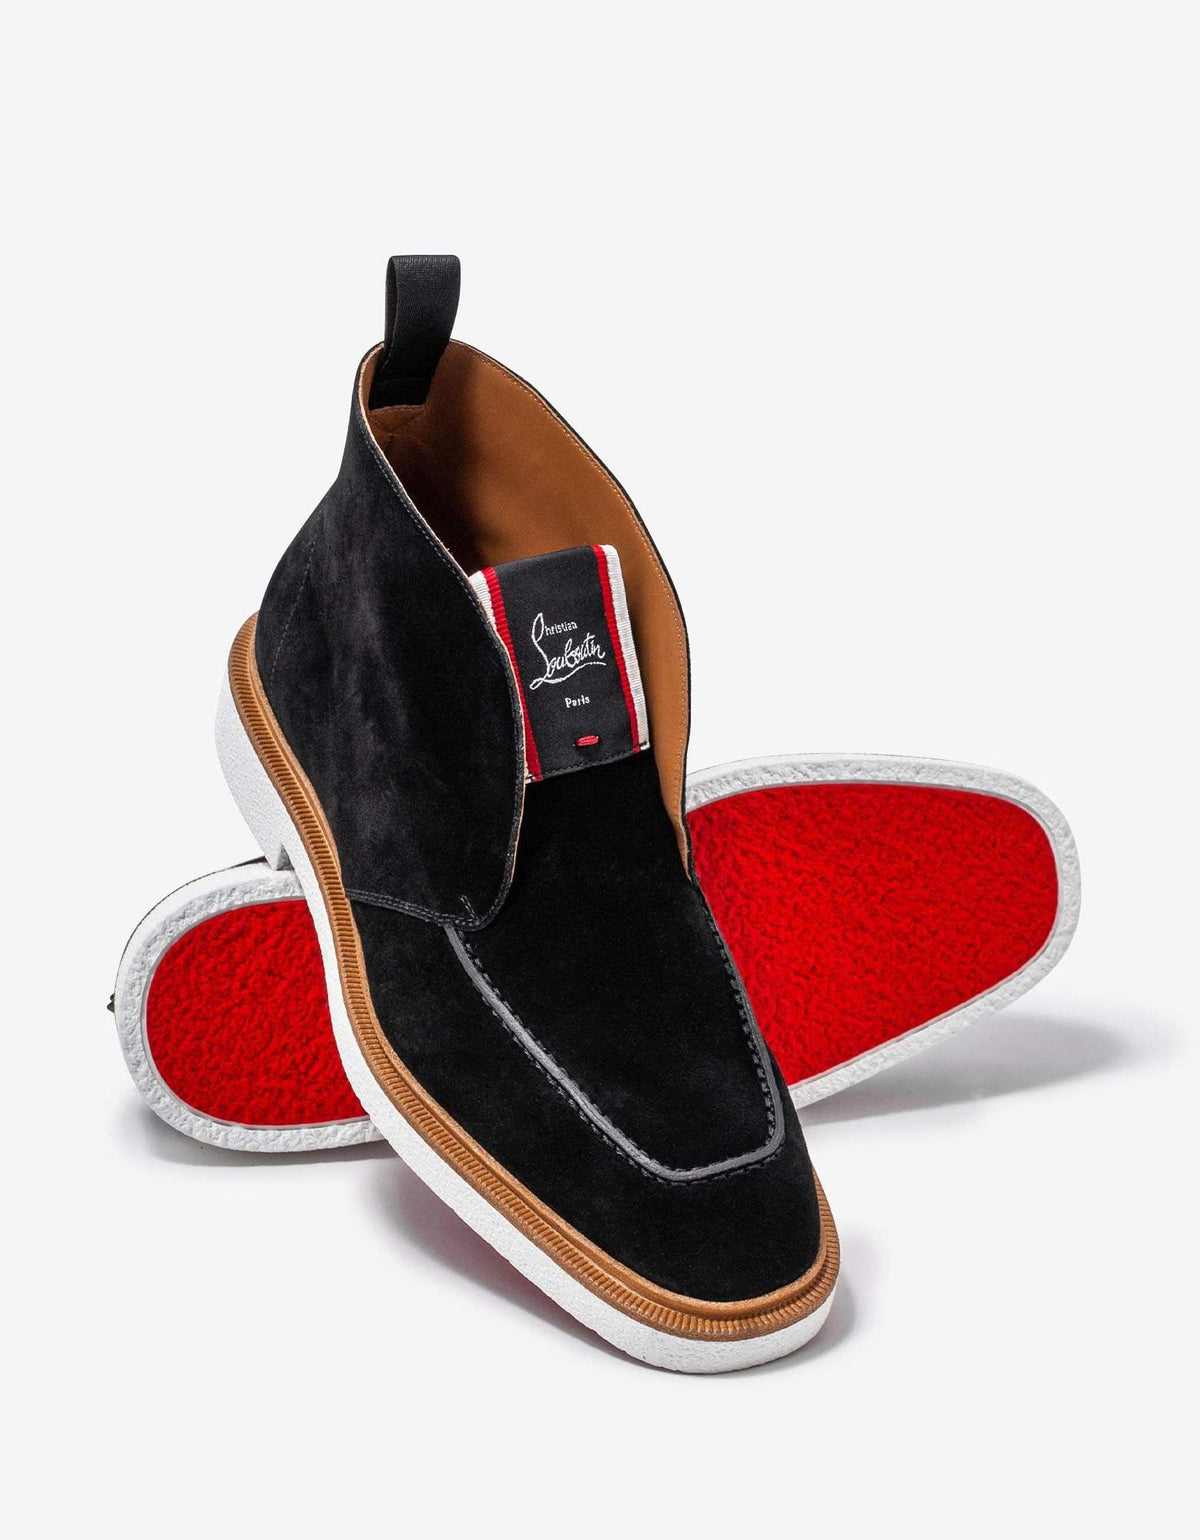 Christian Louboutin Citycrepe Black Suede Ankle Boots -